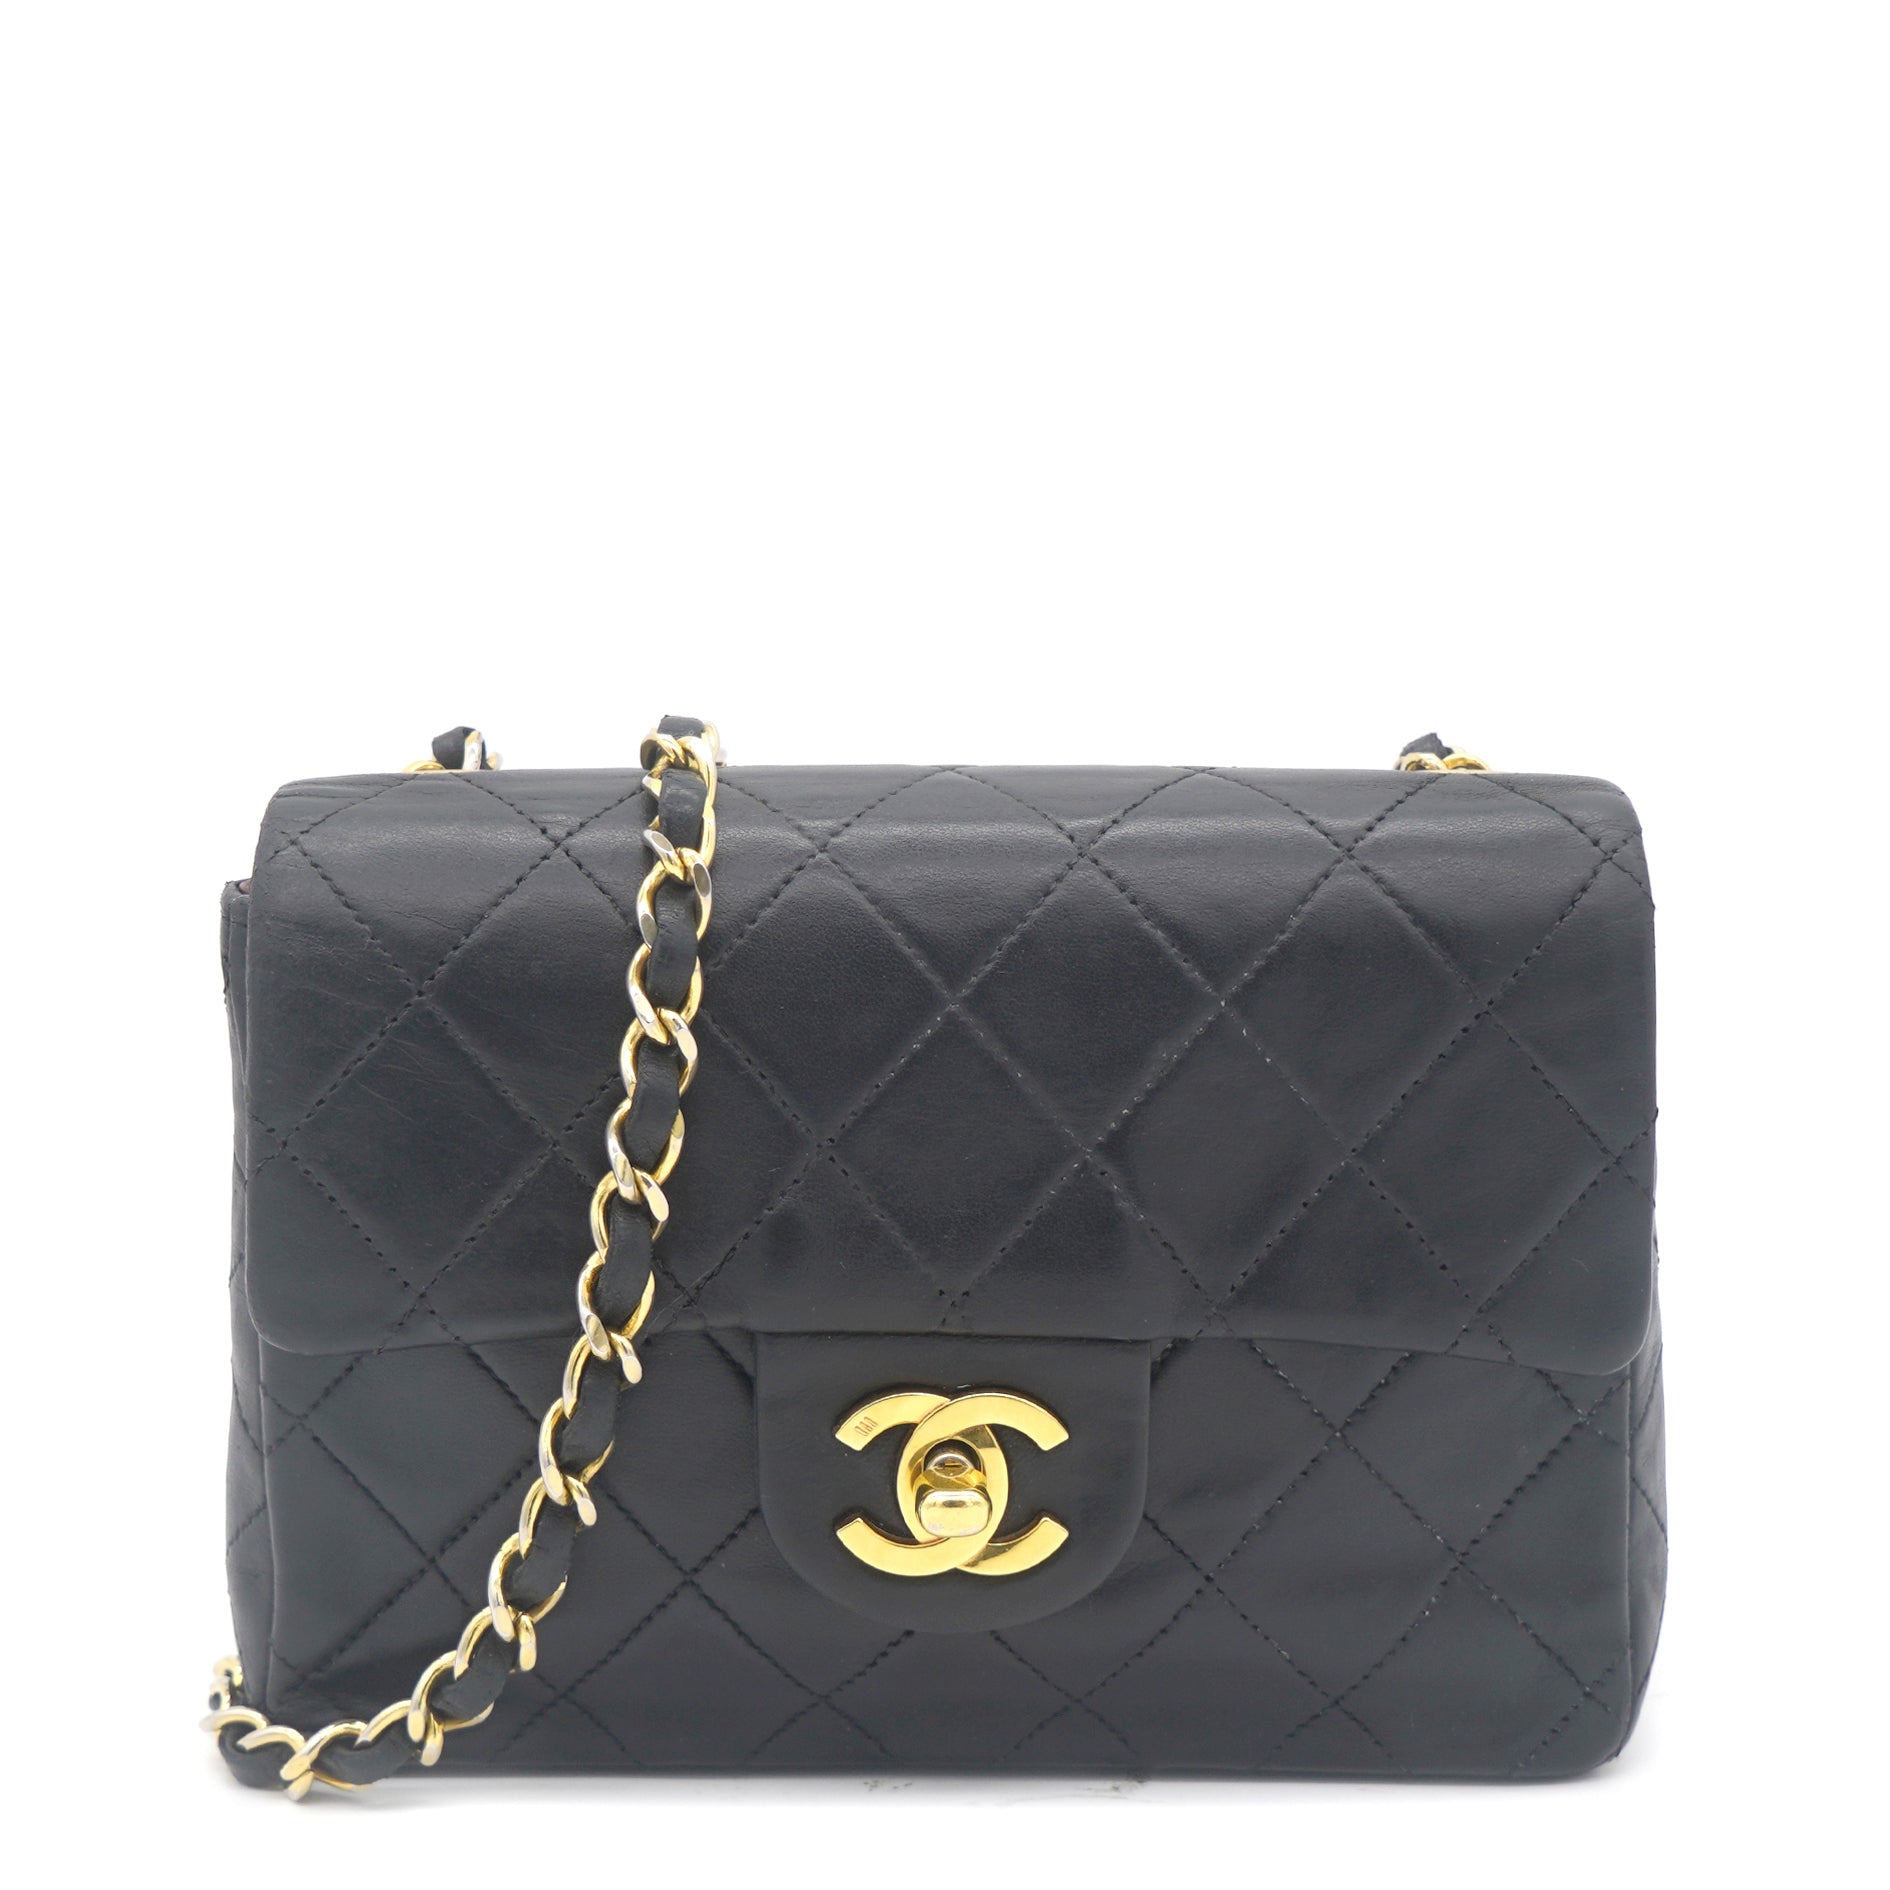 CHANEL Quilted Lambskin Leather Chain Clutch Bag Black